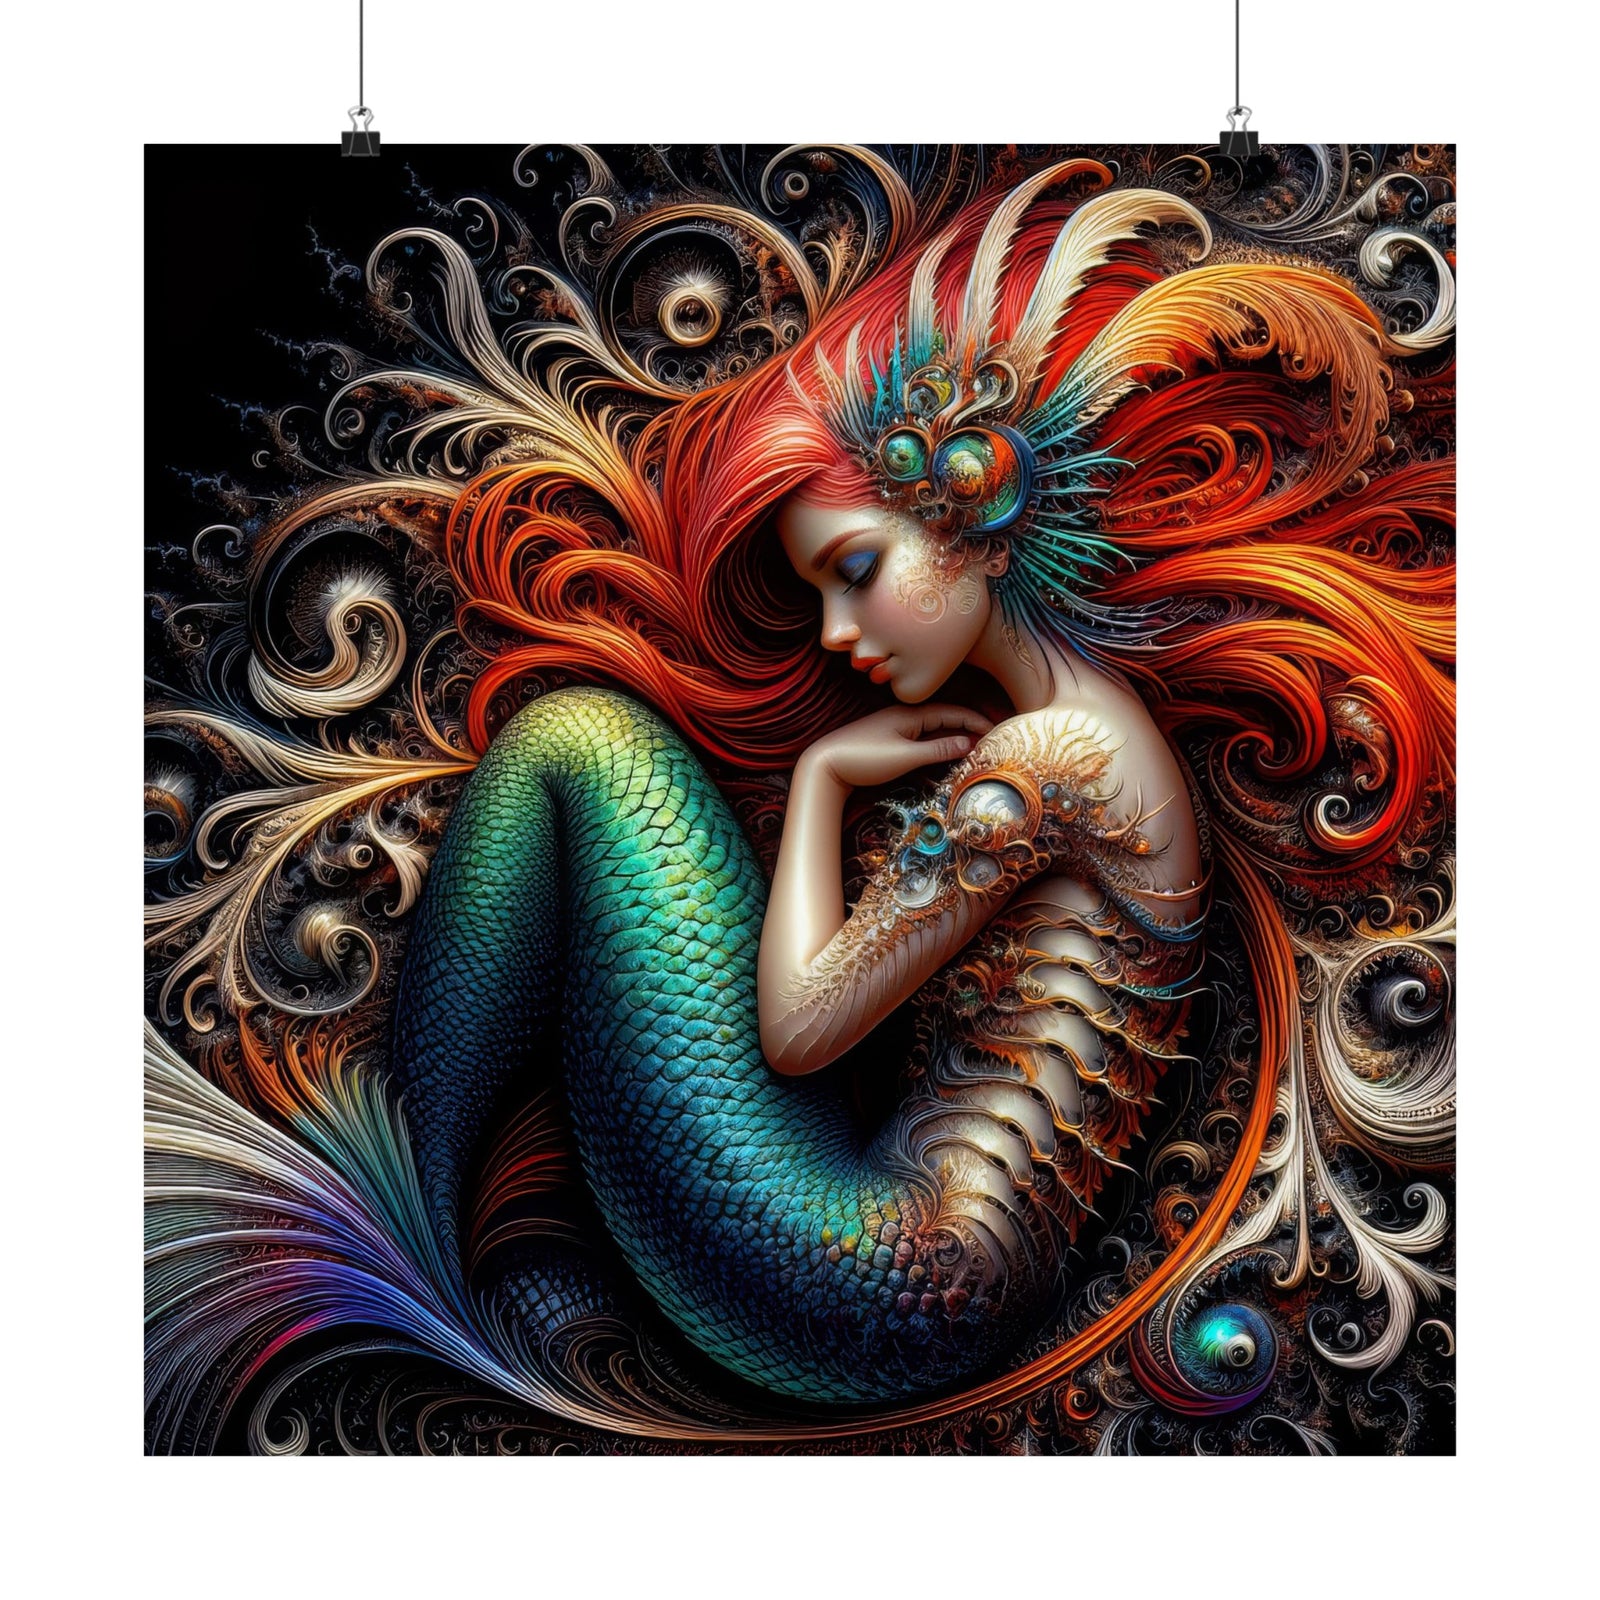 Mermaid's Soliloquy Poster